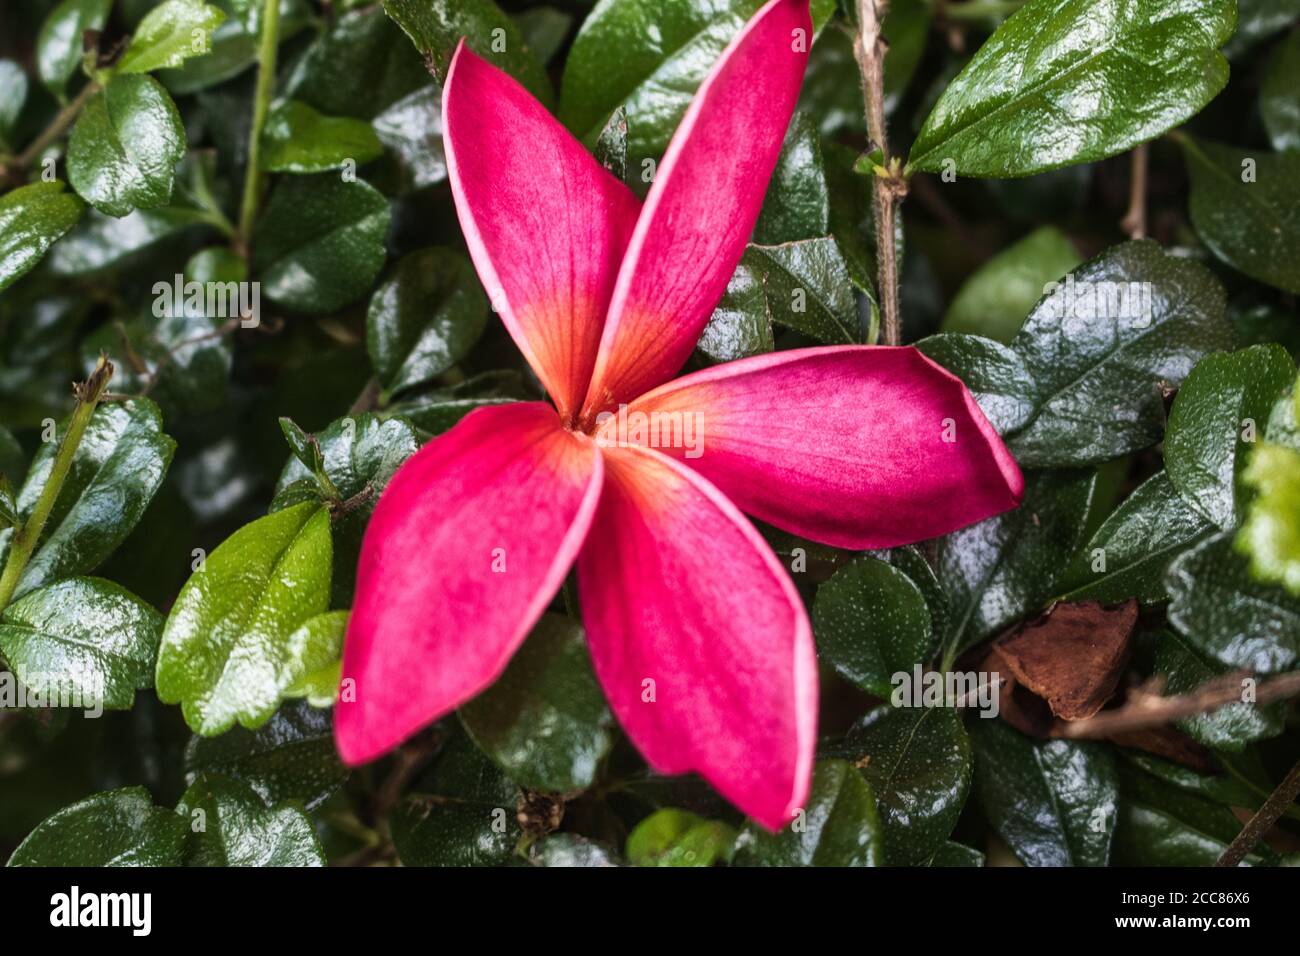 This unique photo shows a pink frangipani flower lying in a green hedge in a garden. Stock Photo